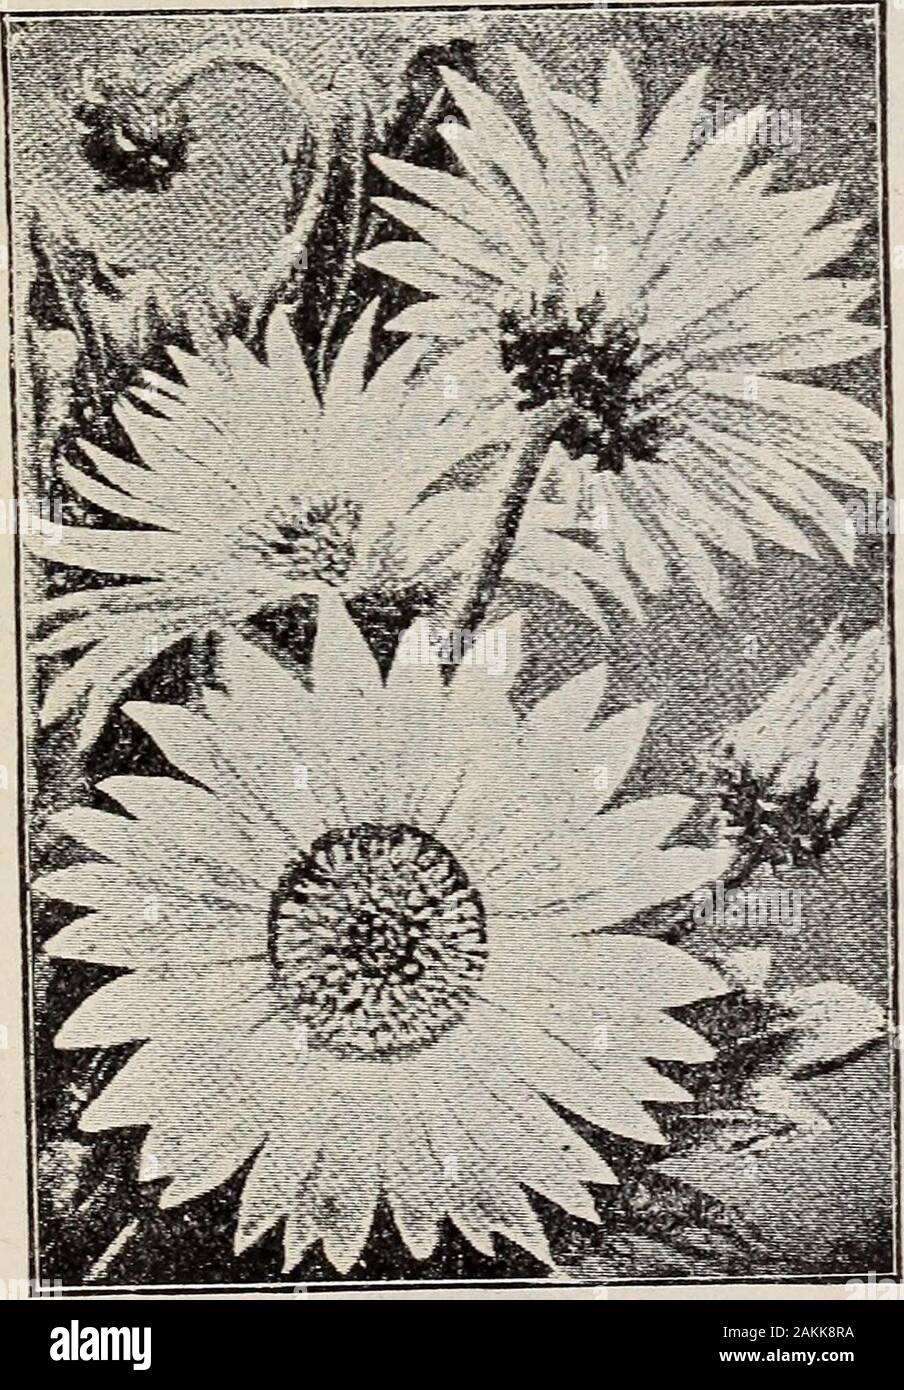 General list of high-grade seeds . s useful for bouquets and cut-flowers. Germain Seed Company, 326-330 South Main St., Los Angeles, Cal. 33 SEEDS OF ANNUALS ABROMA umbellata (Sand Verbena). Del-icate rose. Beautiful native trailer.Height 14 ft 3 ADONIS Flos (Pheasants Eye). Crimson,with black eye. A beautiful, showy,free-flowering plant. Height 1 ft AGERATUM Mexicanum. Fine for beddingor mixed borders. Imperial Dwarf Blue. Height % ft Imperial Dwarf White. Height 34 ft ALYSSUM. B. Well-known fragrant annu- Sweet. White. Height % ft Sweet Compact. Dwarf, White. Height one-third ft AMARANTHUS. Stock Photo